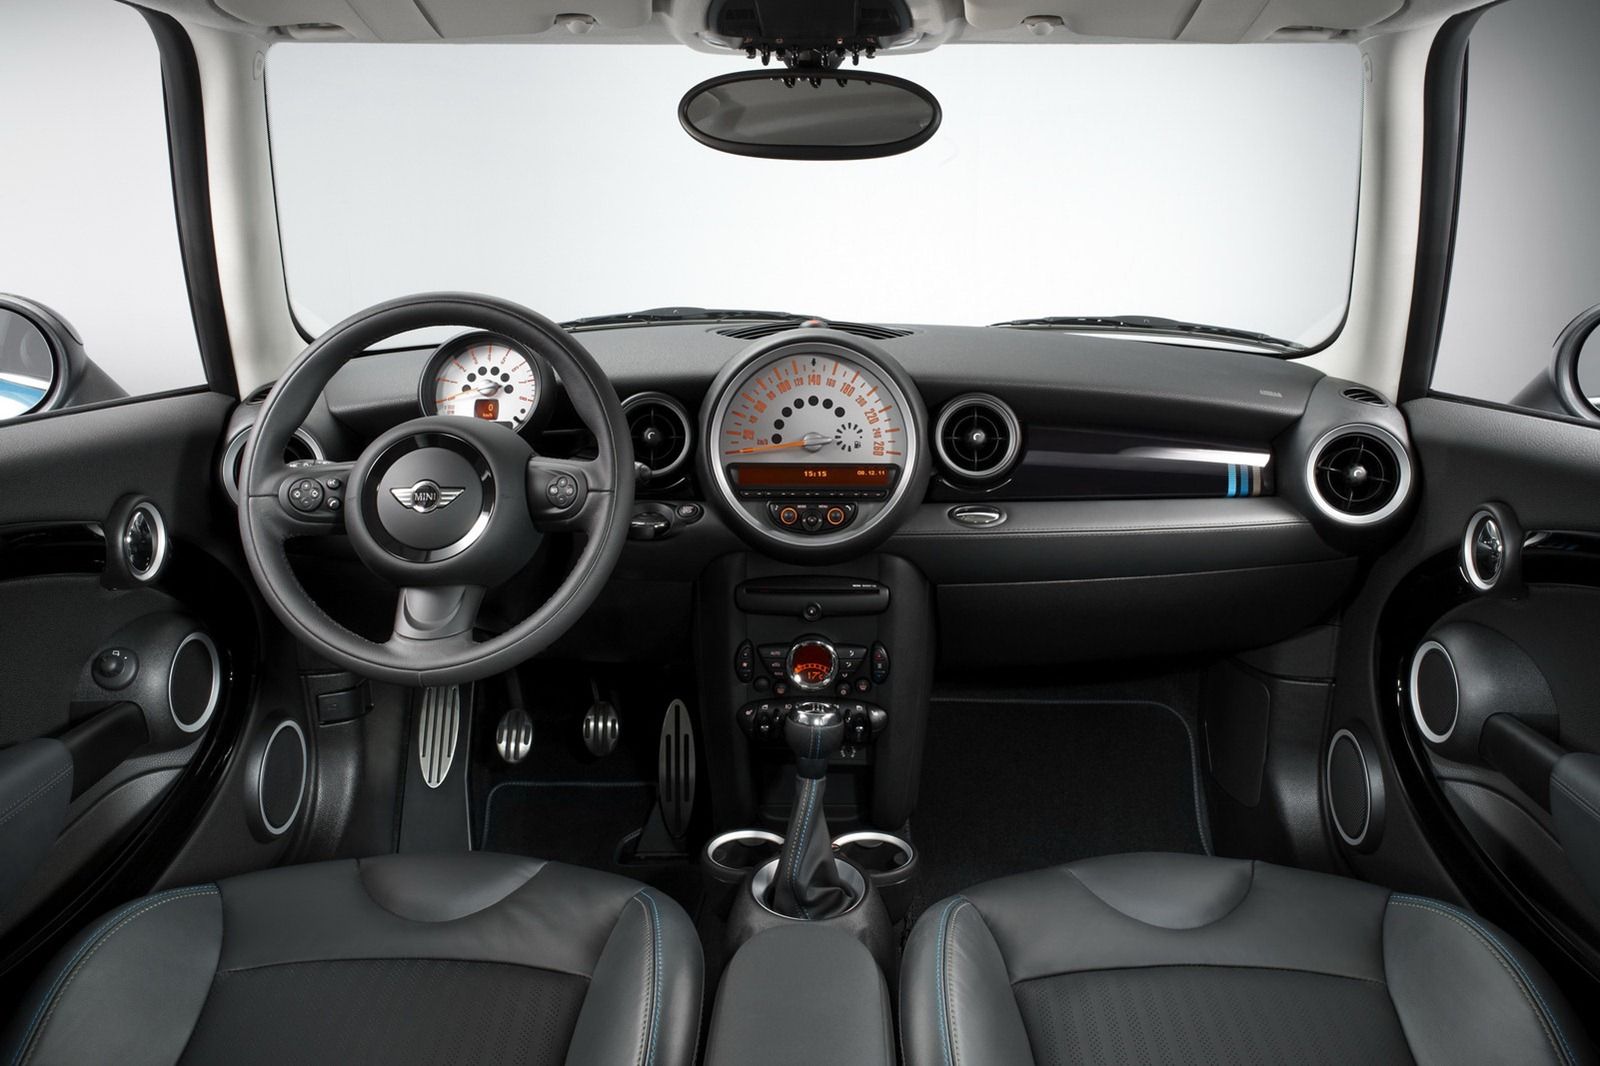 2012 MINI Cooper Bayswater Special Edition